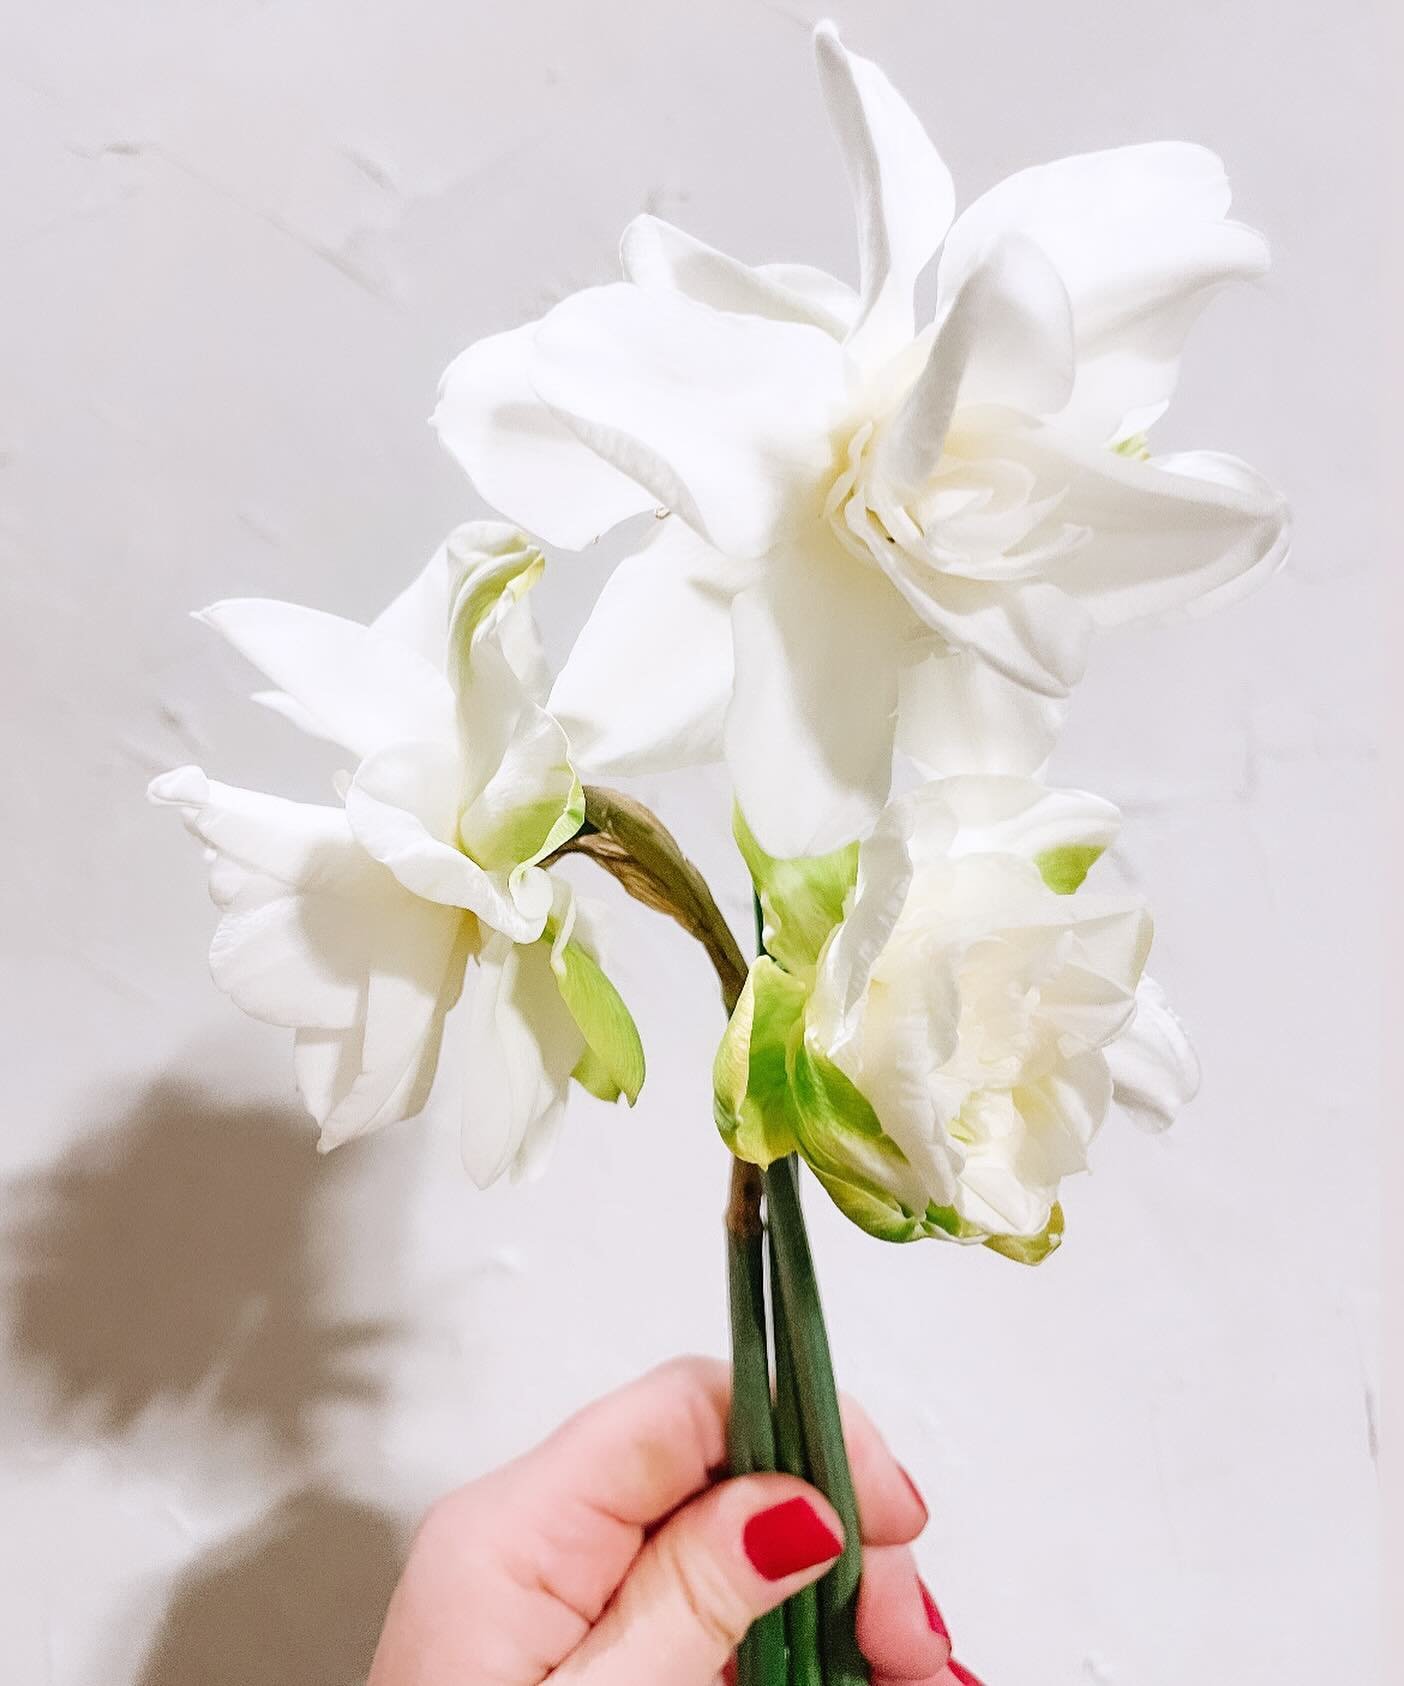 There are few things more miraculous than springtime in the Midwest.  The whole world becomes revitalized and vibrant.  It&rsquo;s simply lovely.

How gorgeous are these narcisuss from @northerly.flora?! Swoonworthy 🤍